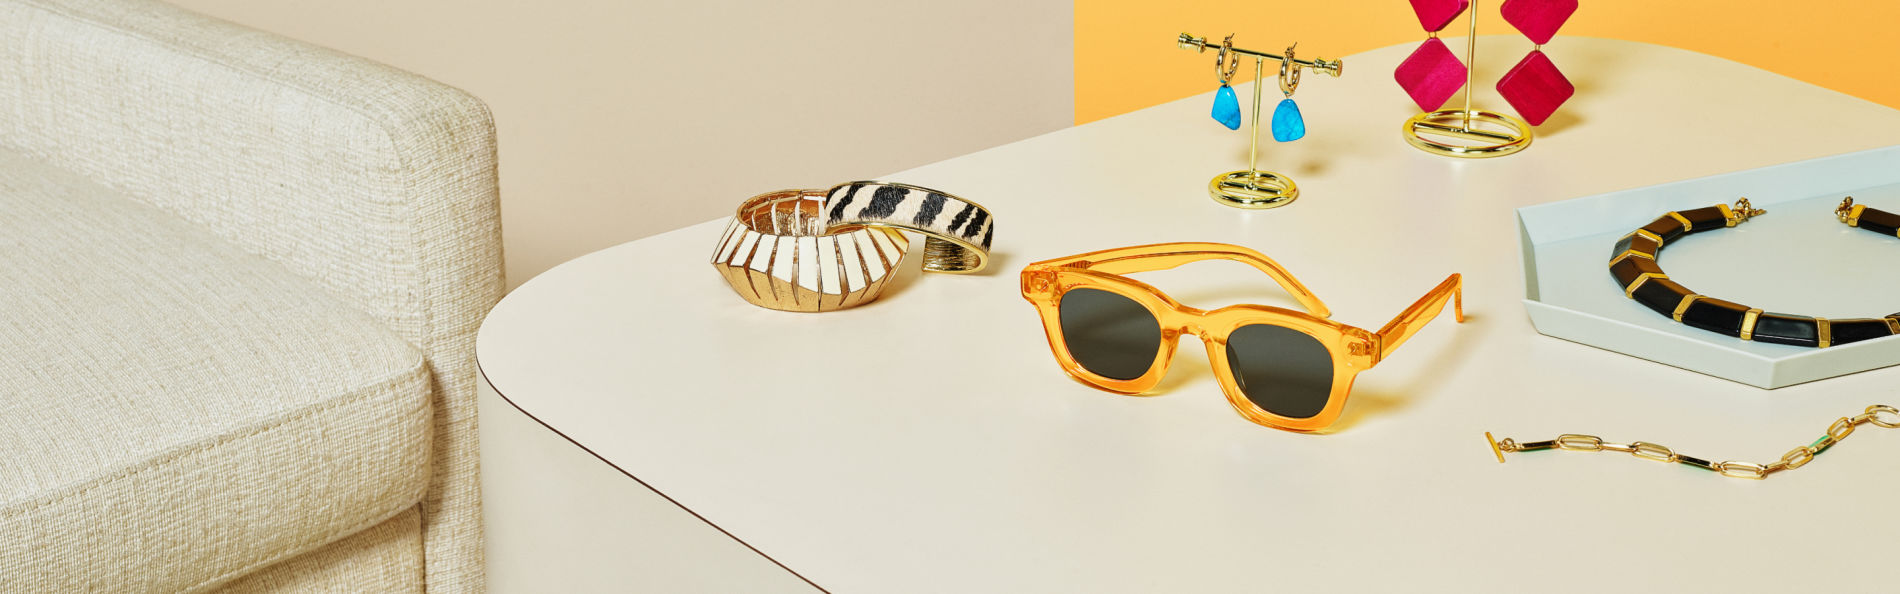 image of sunglasses and accessories on table